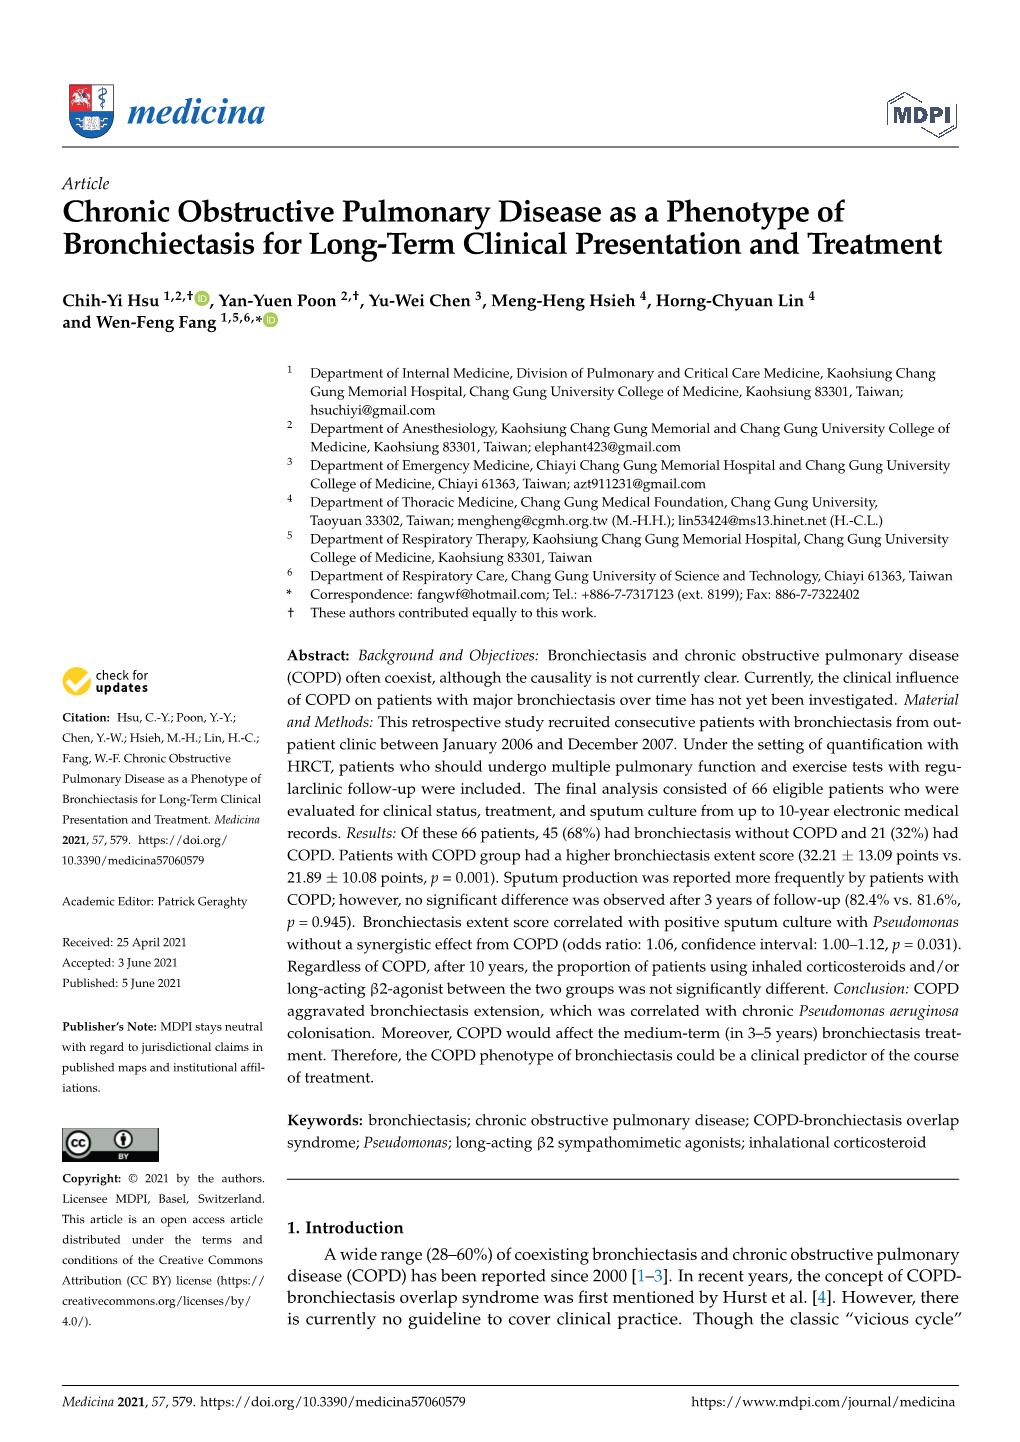 Chronic Obstructive Pulmonary Disease As a Phenotype of Bronchiectasis for Long-Term Clinical Presentation and Treatment